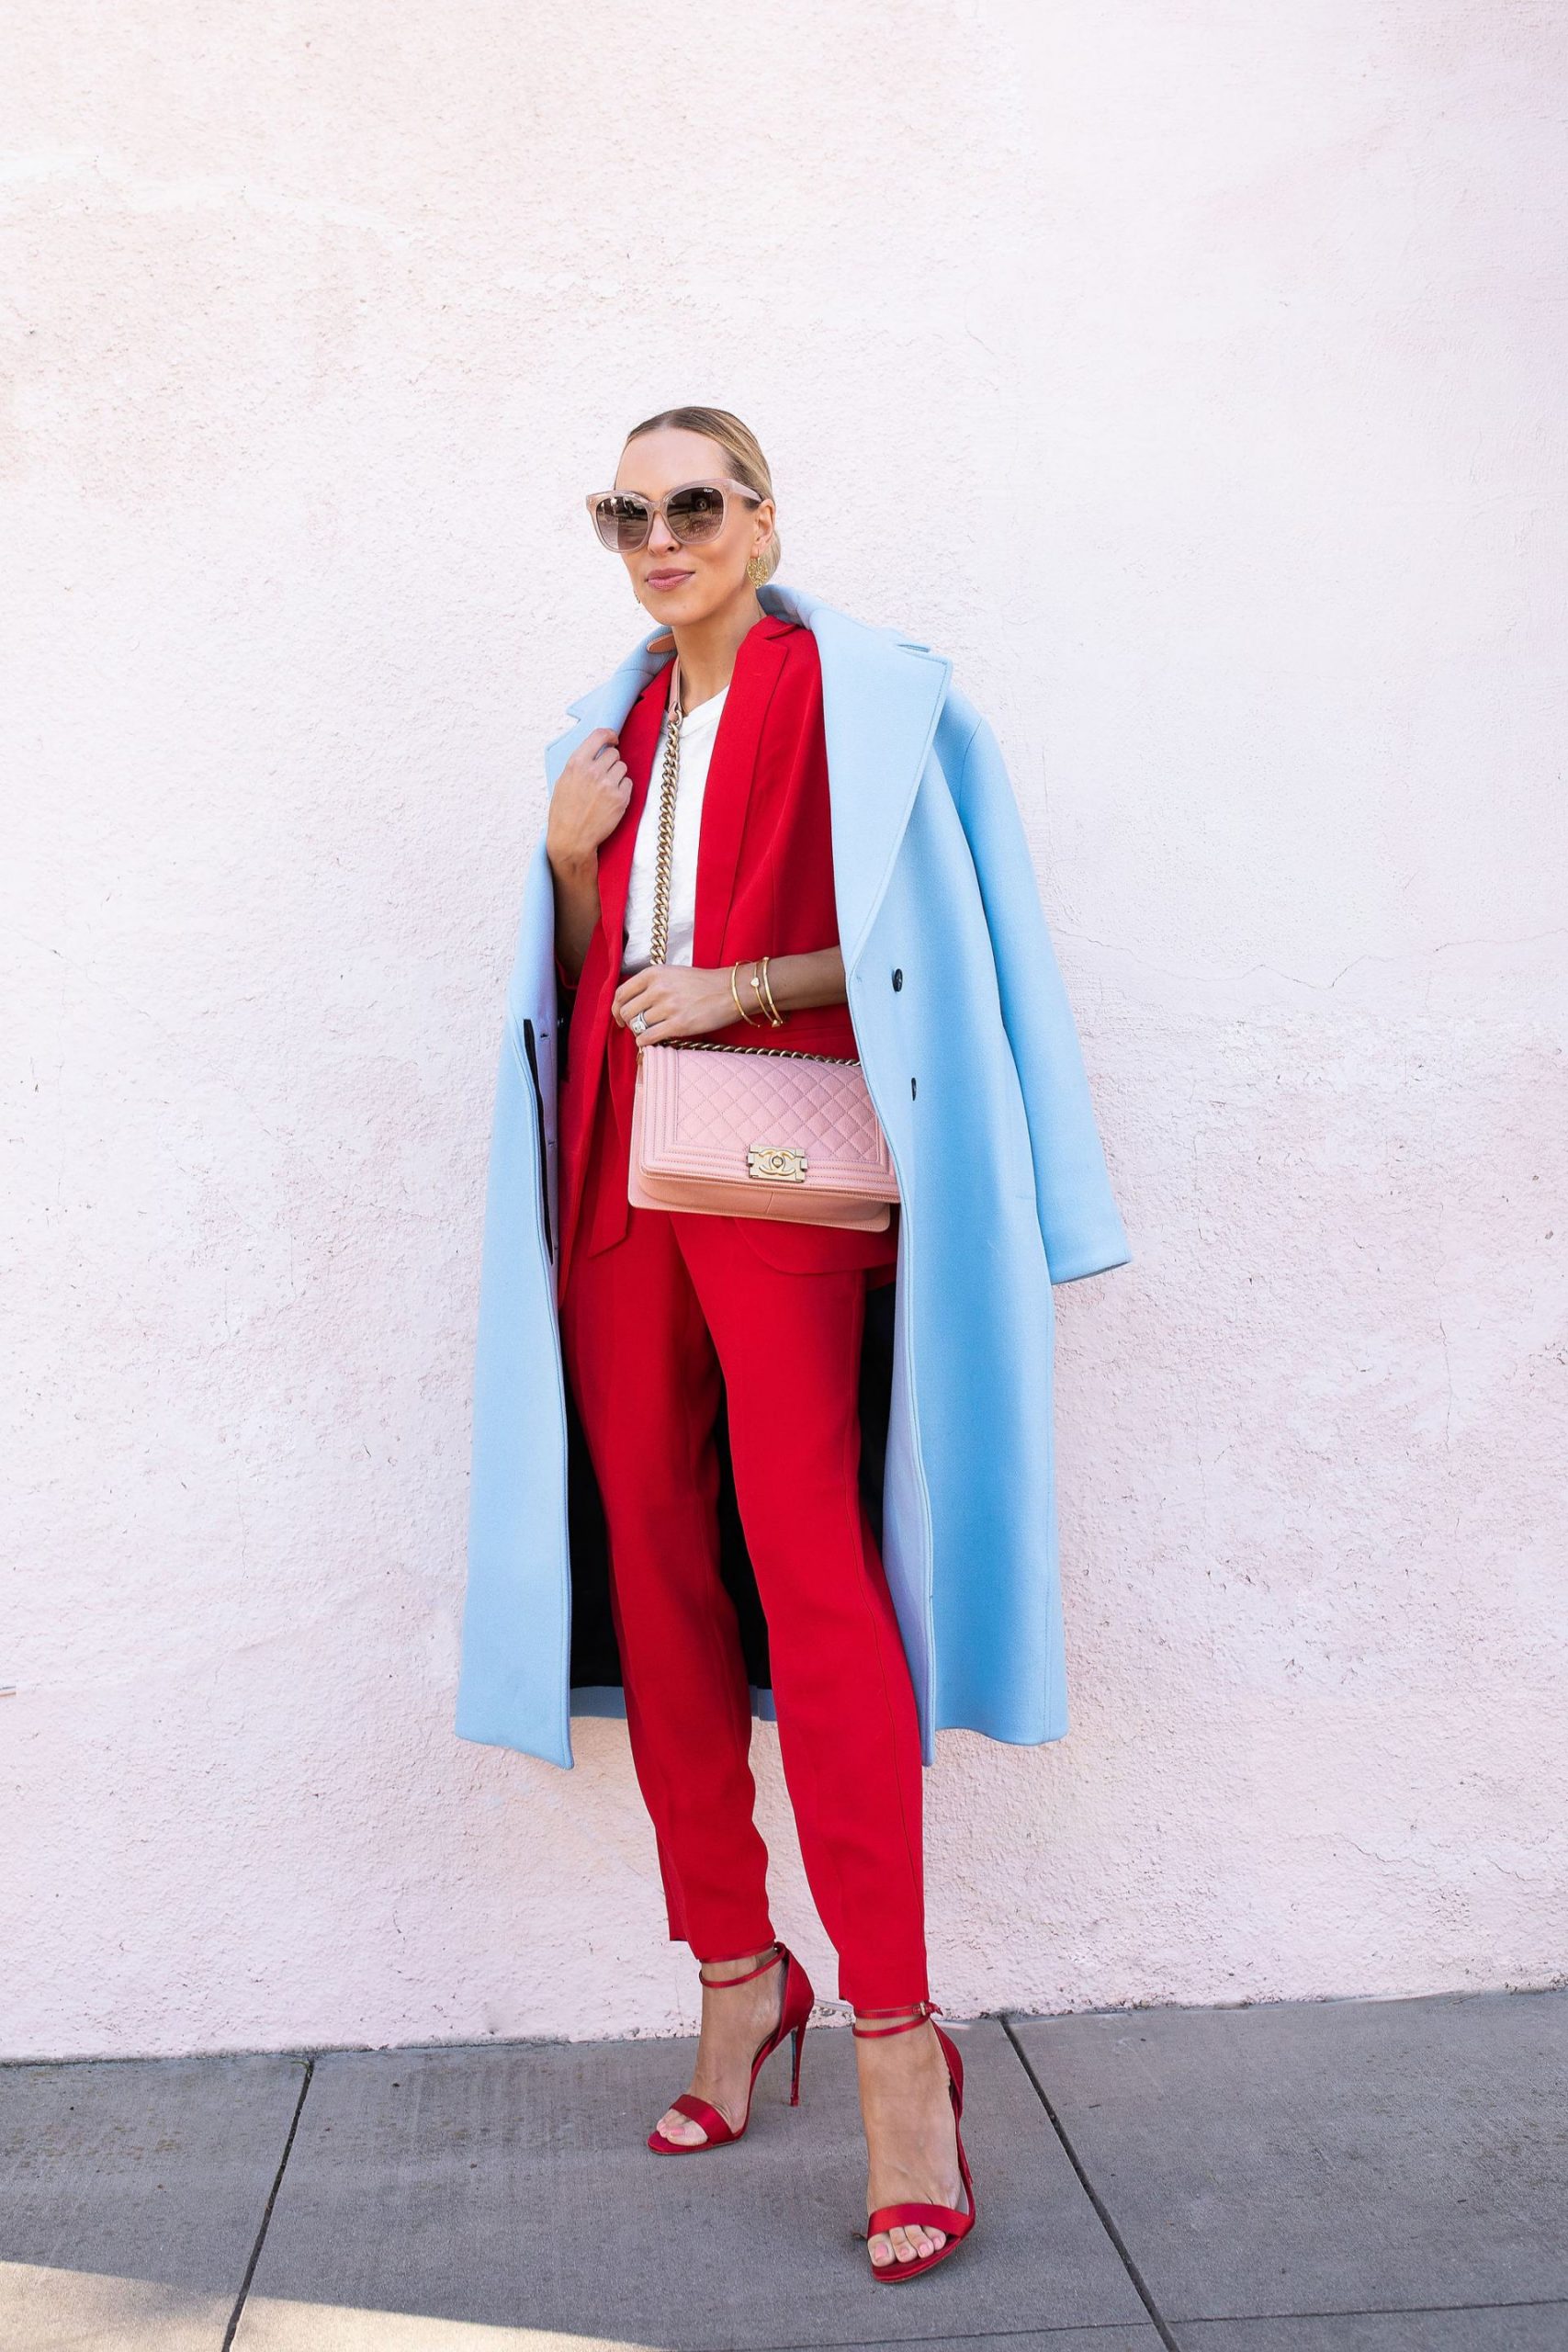 Red Express blazer trousers suit with Zara blue coat, layers for winter. By Lombard & Fifth, Veronica Levy.